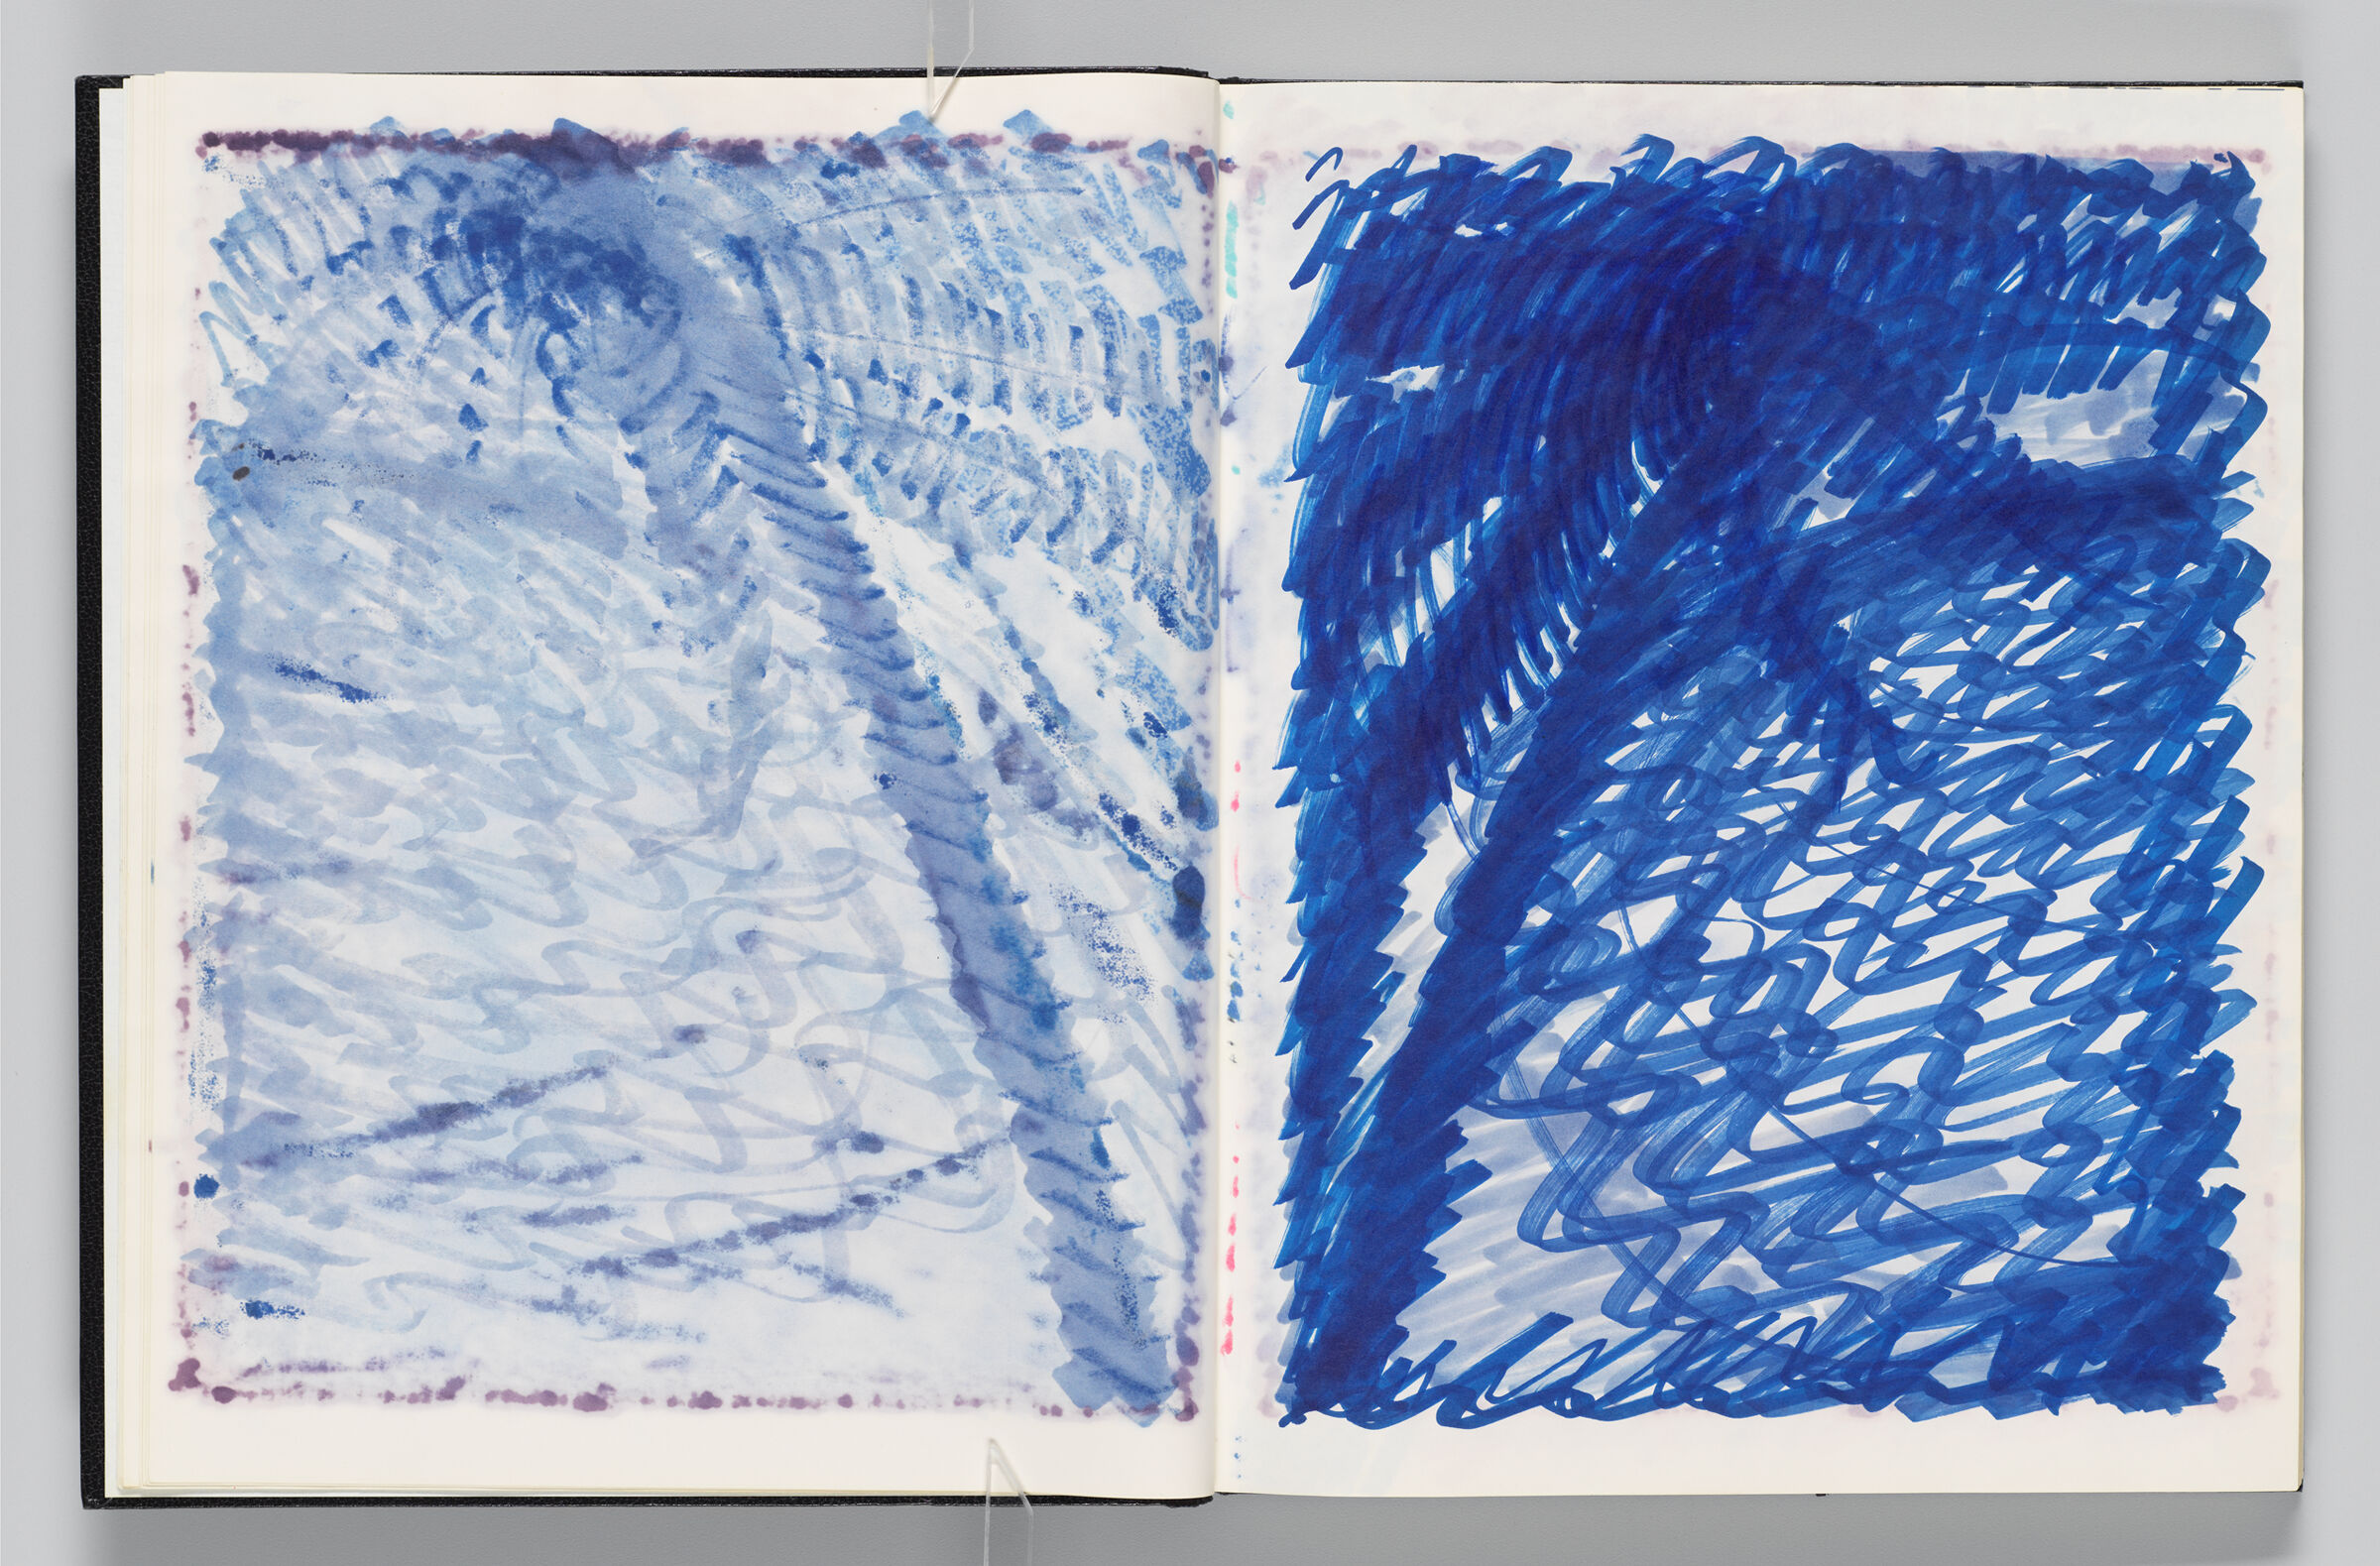 Untitled (Bleed-Through Of Previous Page, Left Page); Untitled (Palm Tree Sketch, Right Page)